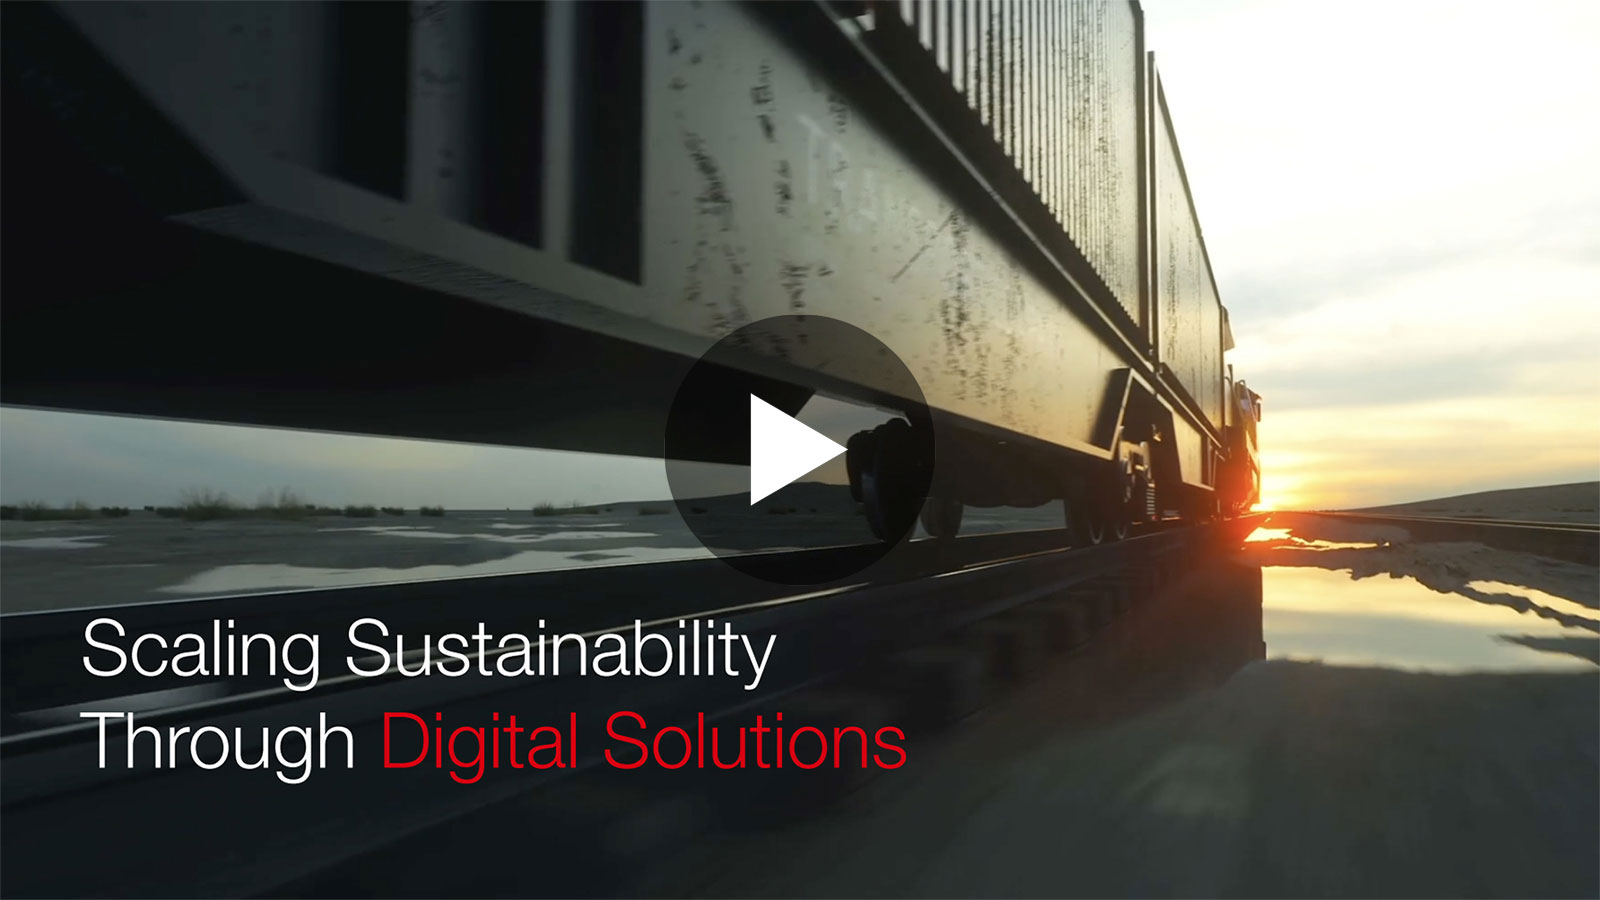 Scaling Sustainability Through Digital Solutions│Wabtec Corporation